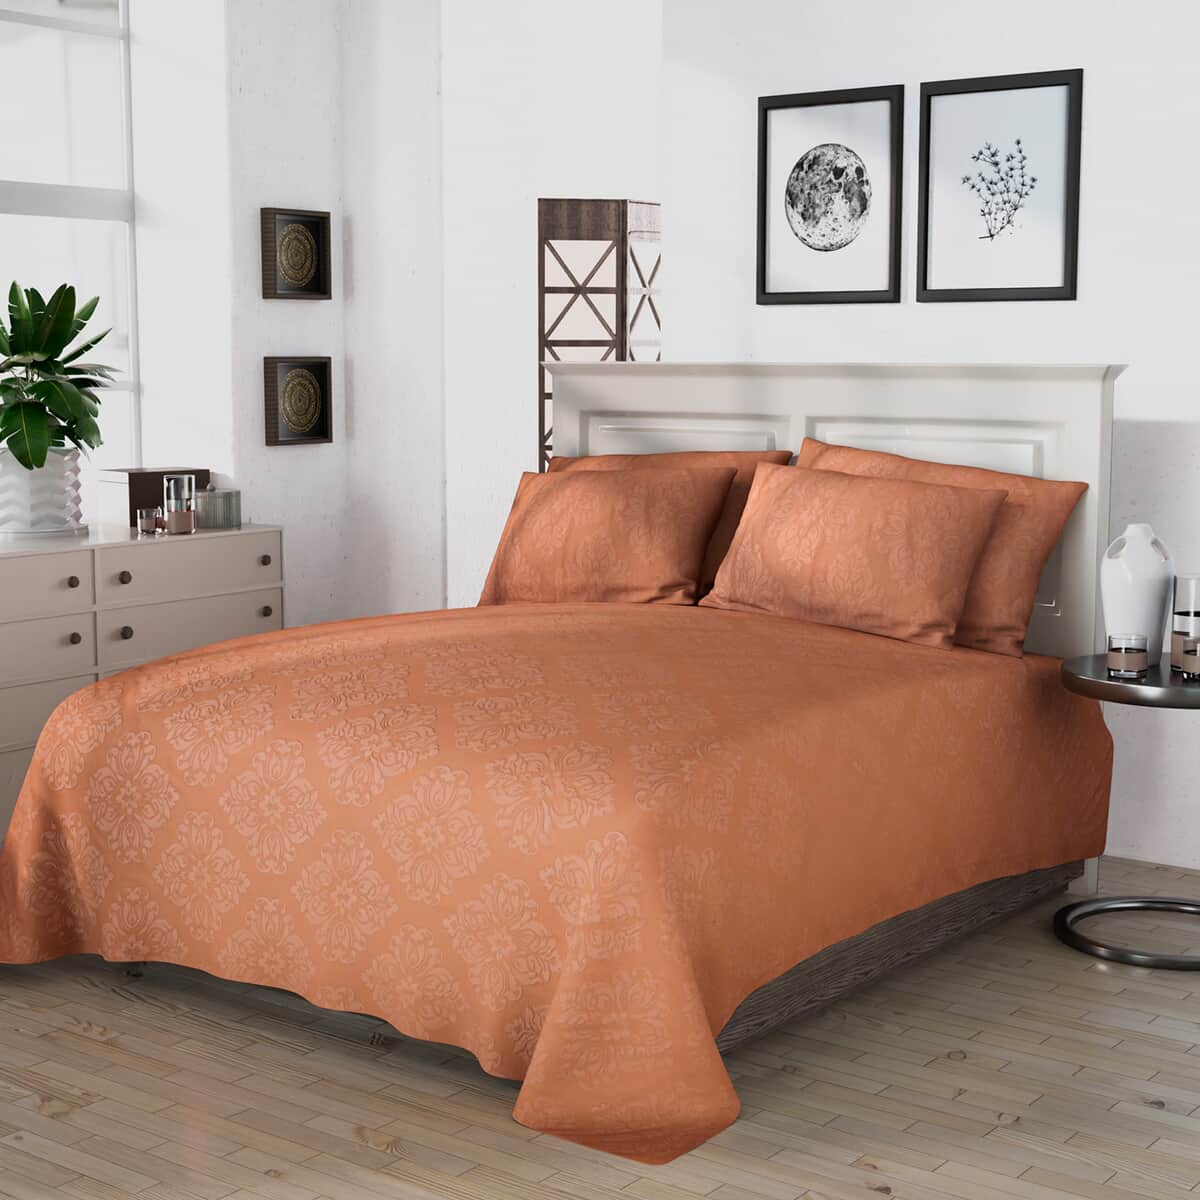 Homesmart Salmon polyester Embossed 6pcs Sheet Set - Queen image number 0